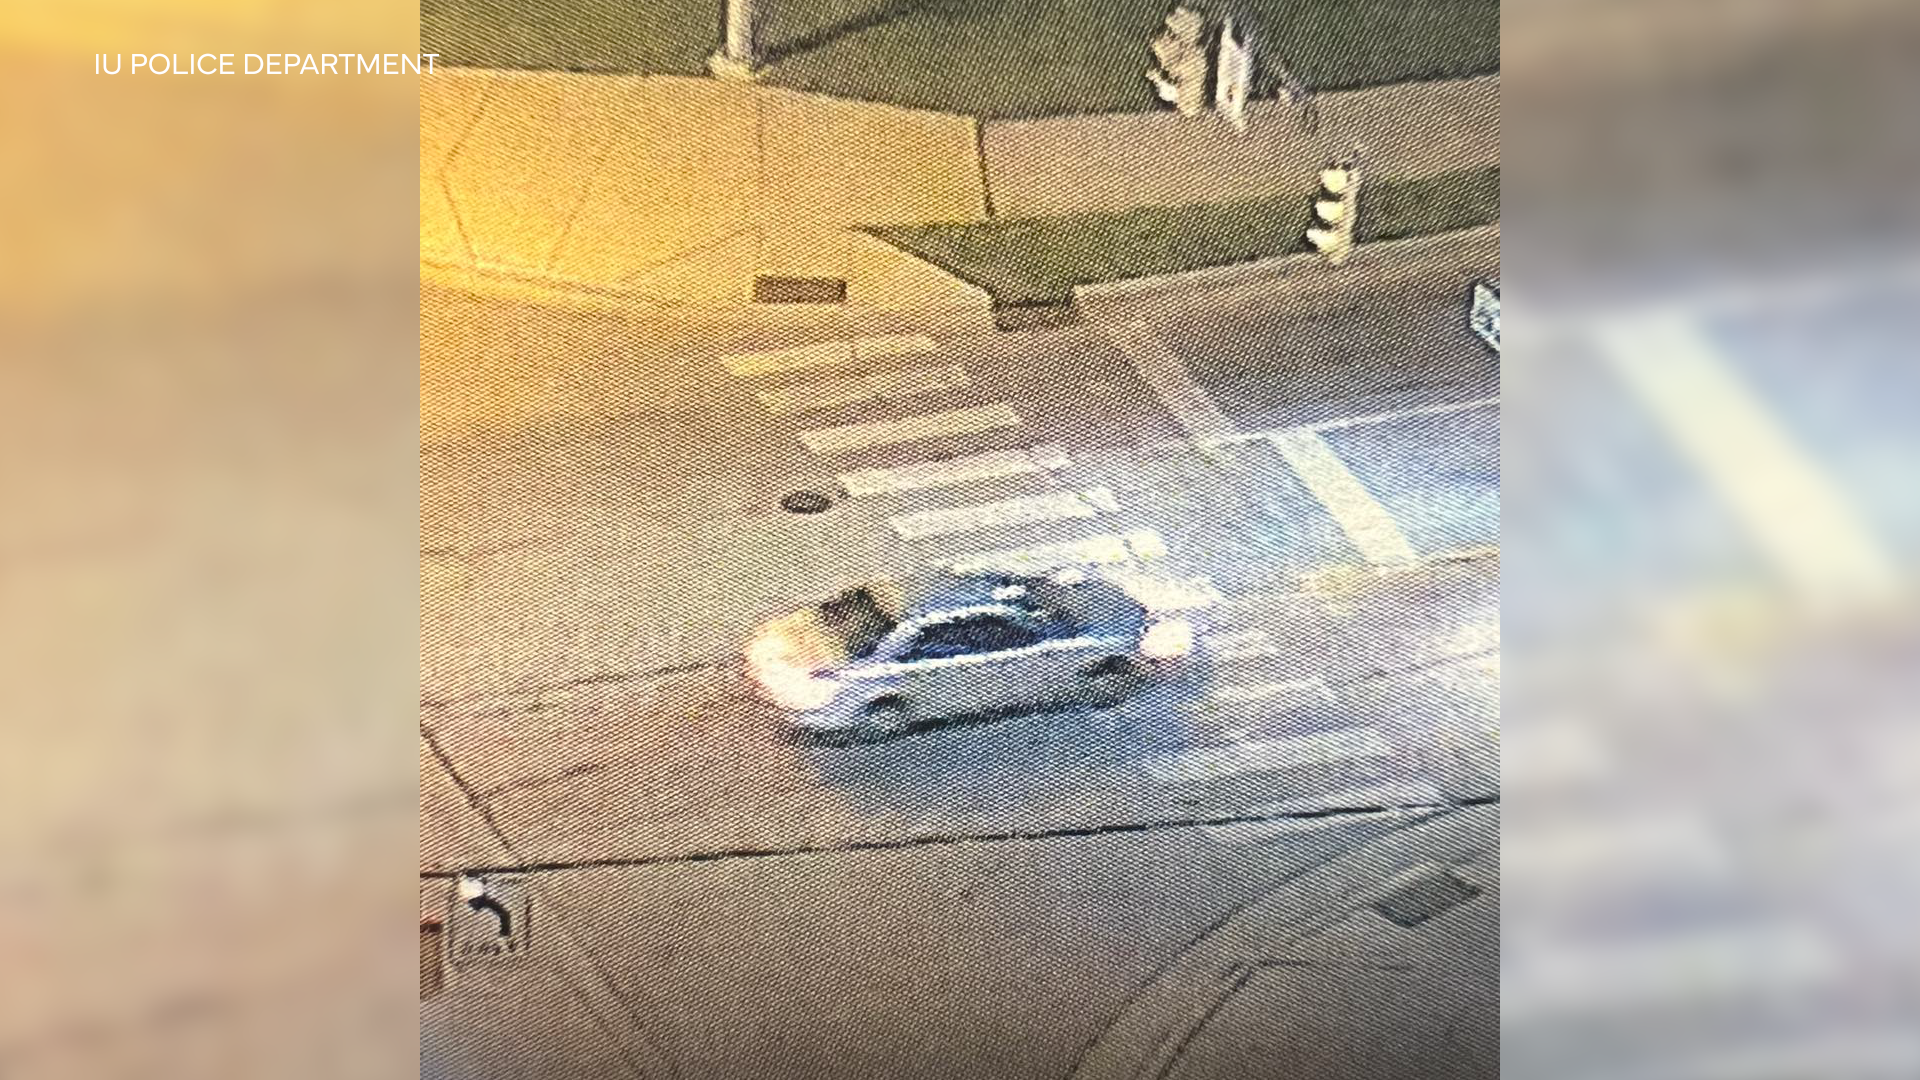 IUPD seeks info on car that hit a pedestrian at 17th Street and Eagelson Avenue